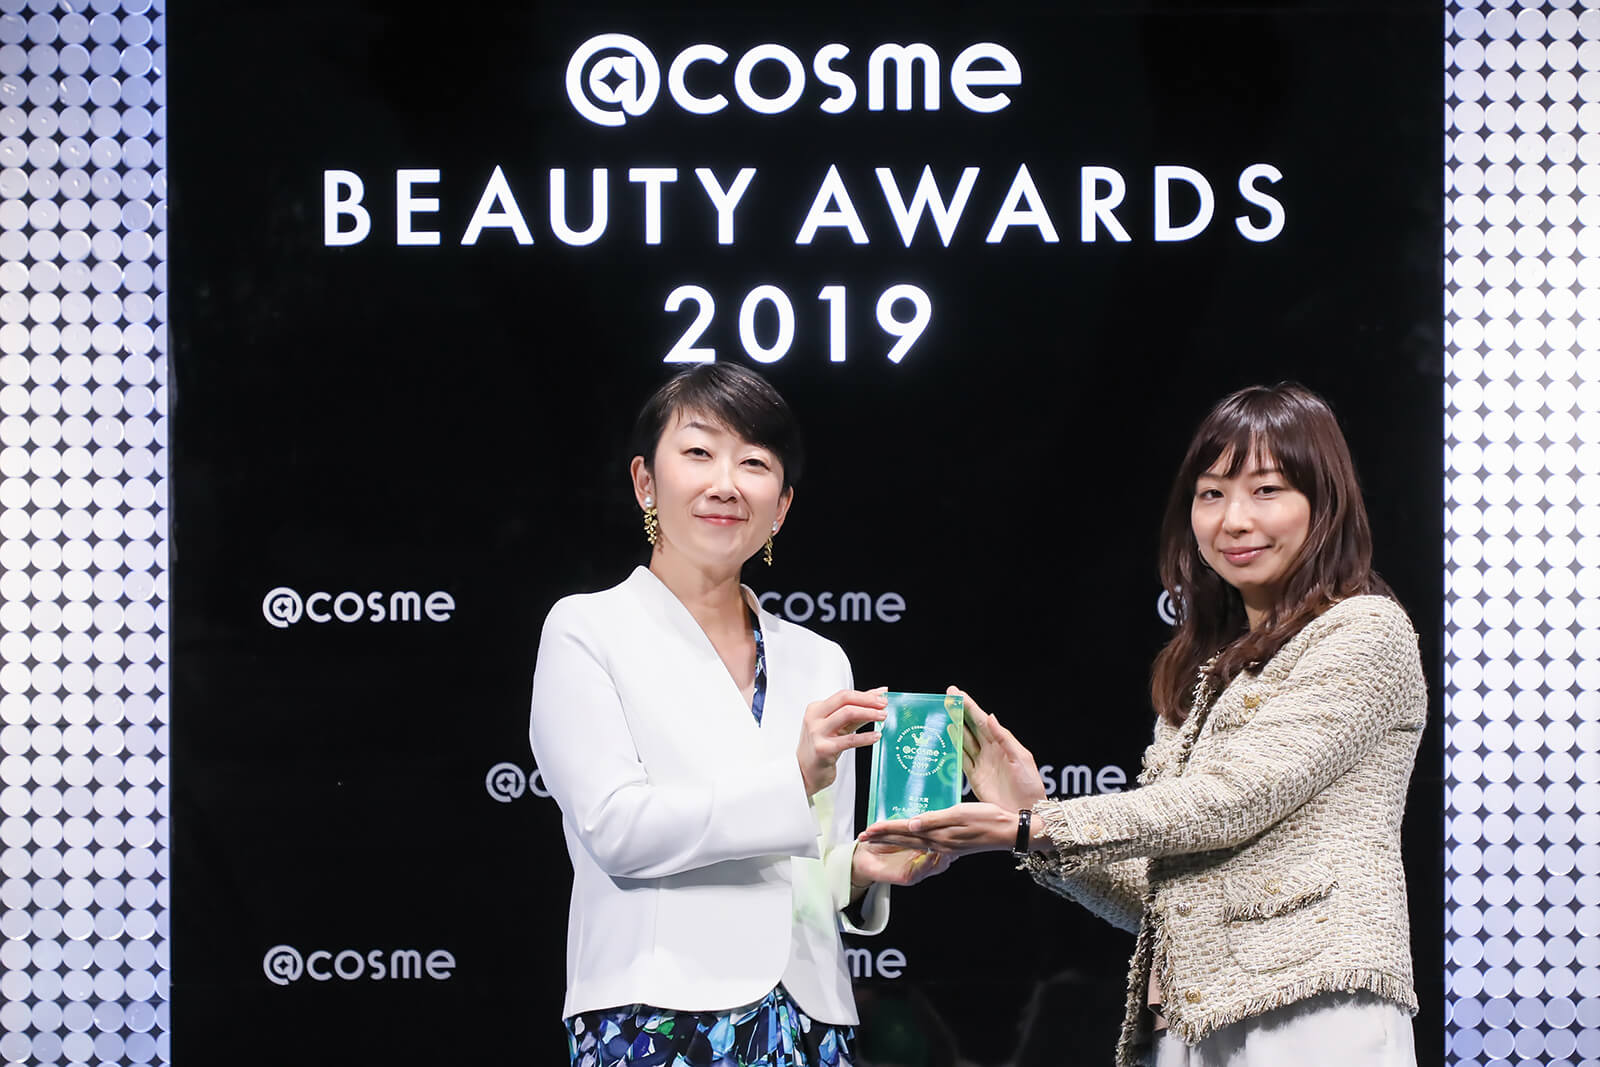 @cosmeビューティアワード2019